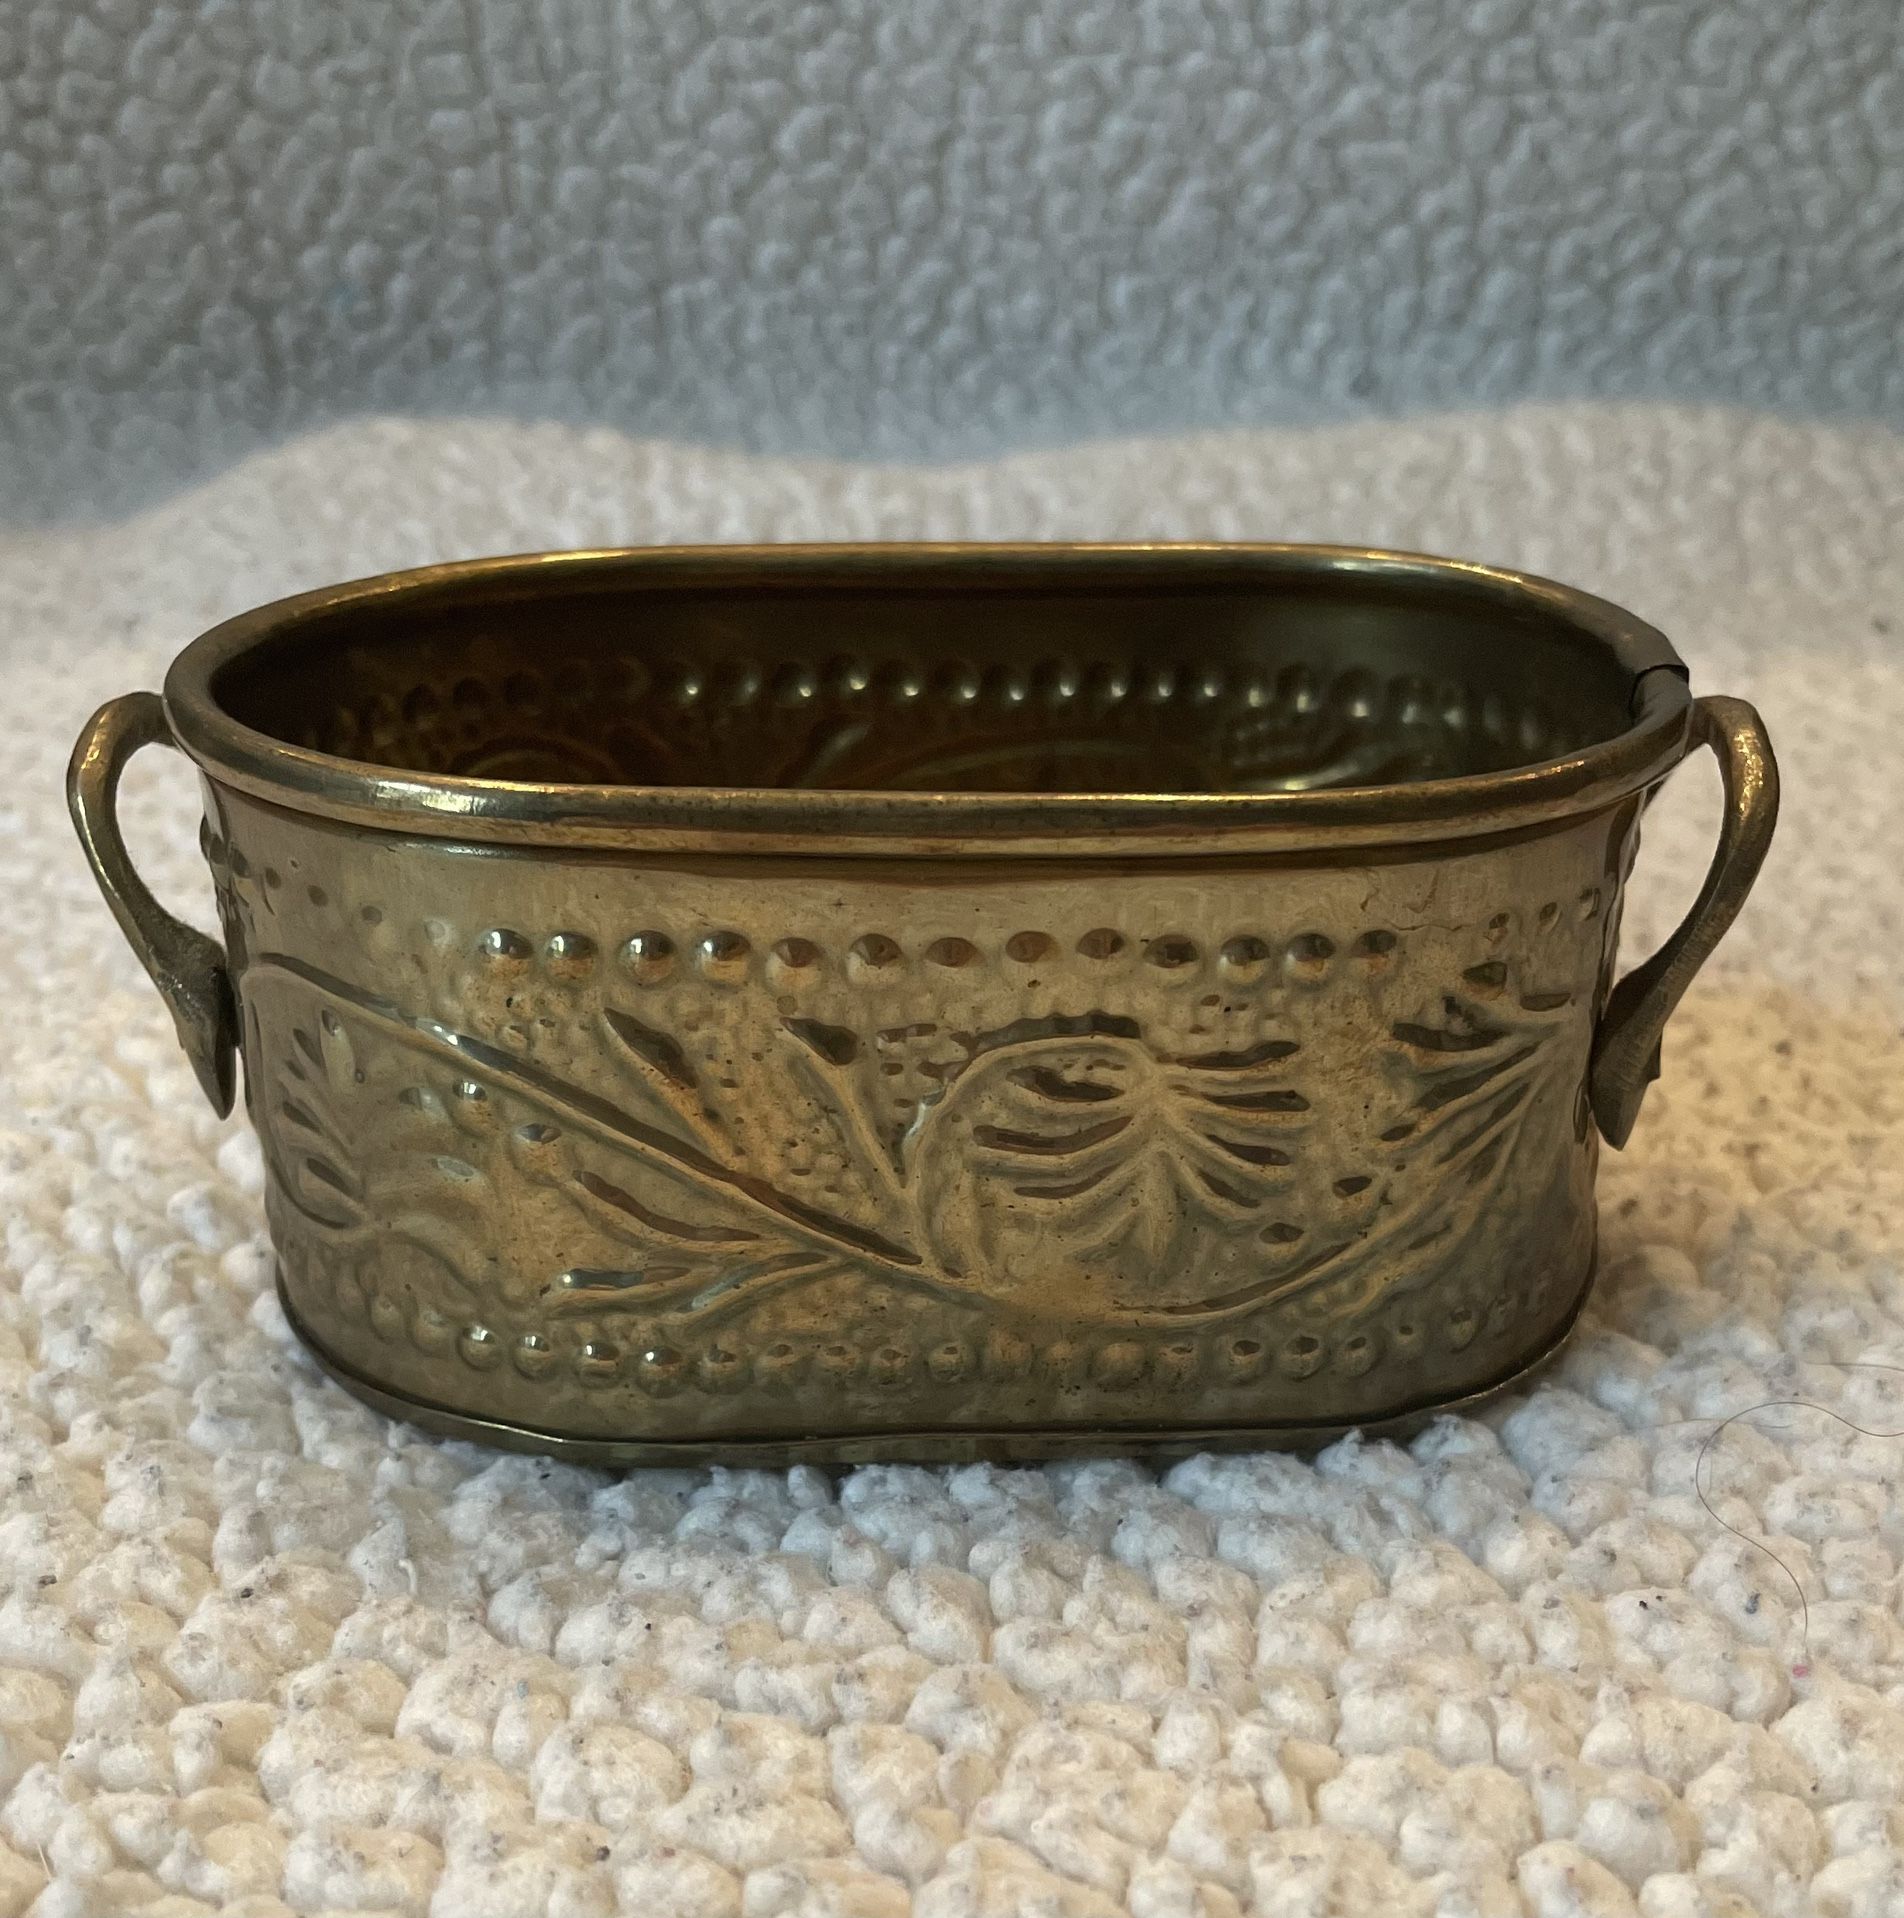 Vintage Solid Brass Decorative Hammered Oval Bowl With Handles Made in India